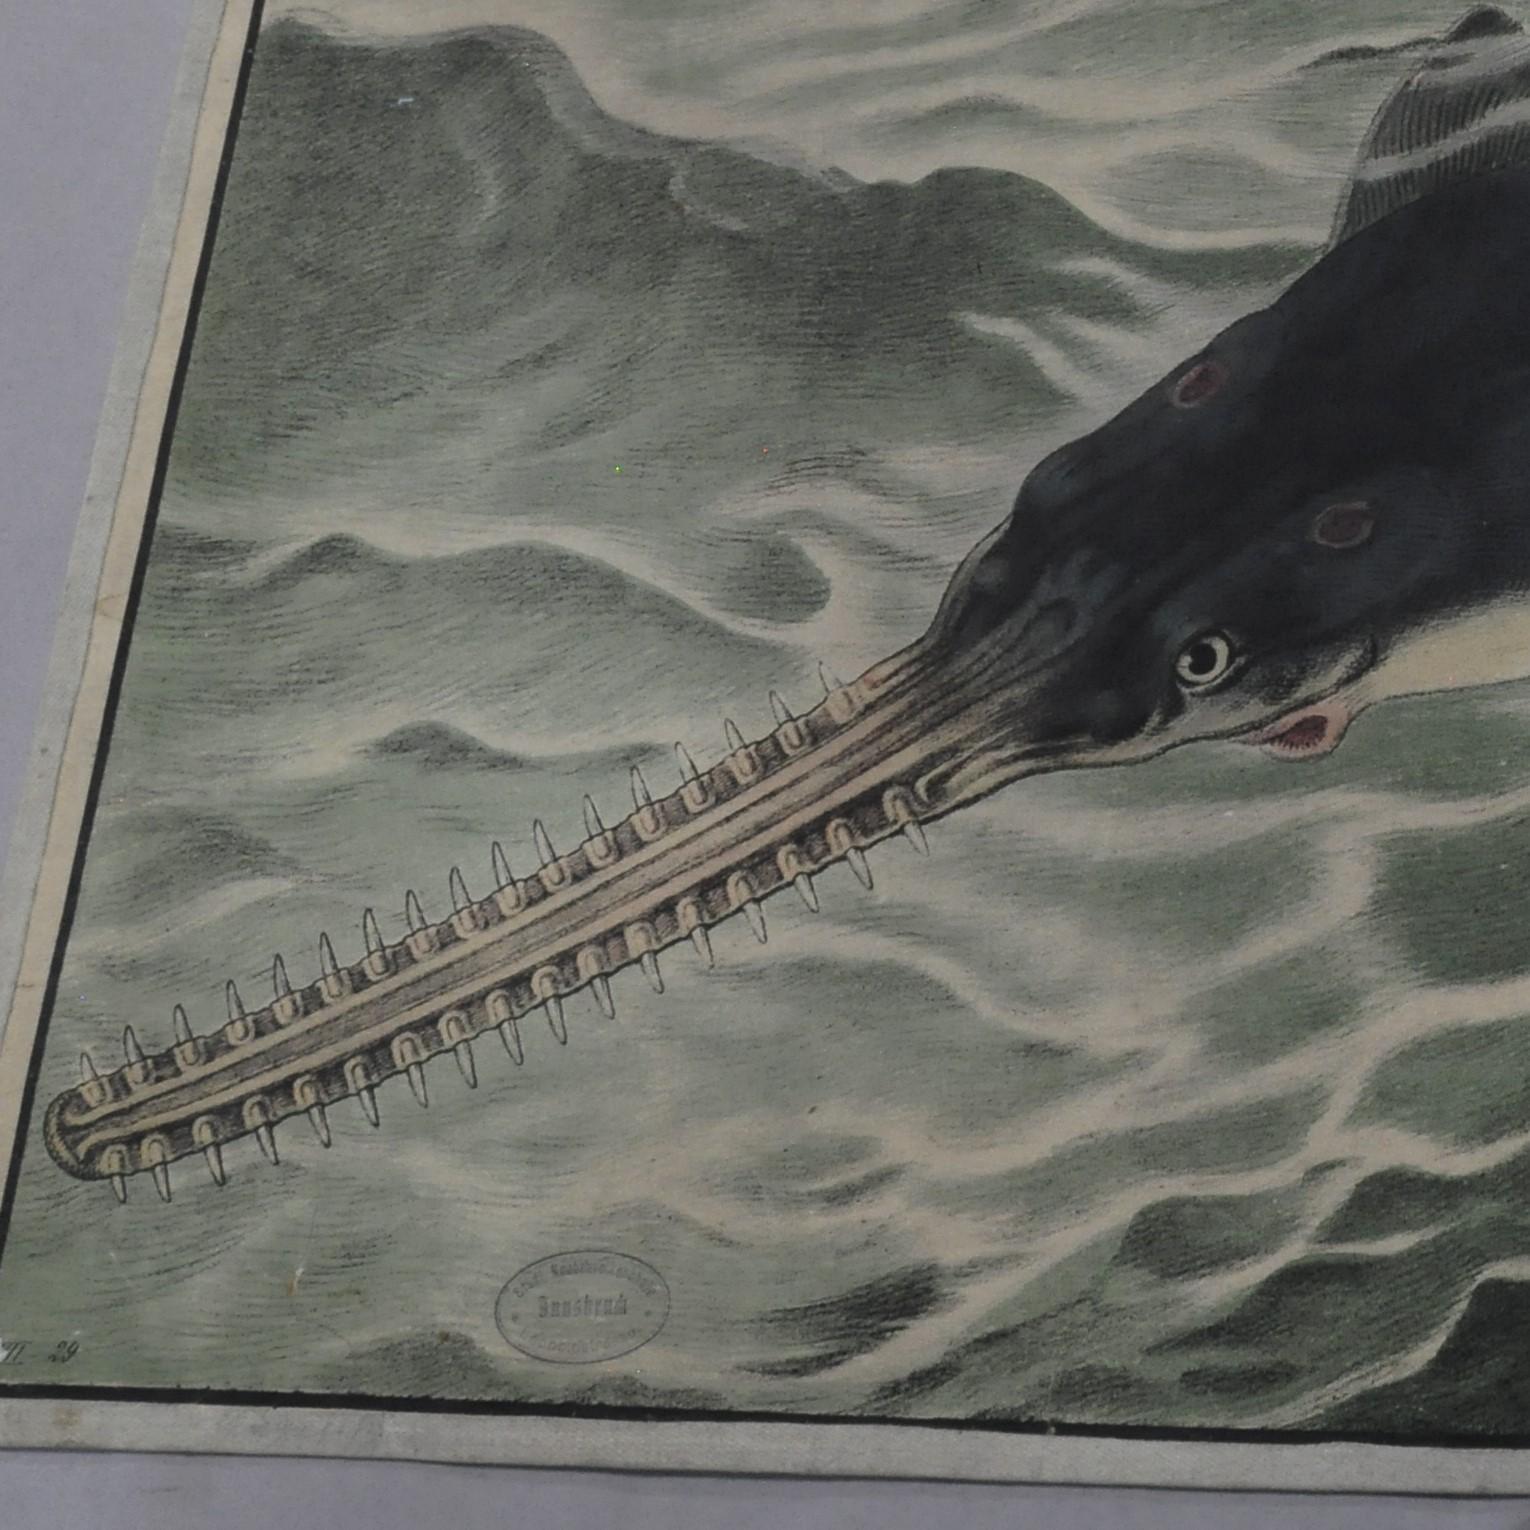 An old vintage-look wall chart showing the appearance of the sawfish. colorful print on fabric.
Measurements:
Width 91 cm (35.83 inch)
Height 63 cm (24.80 inch)

Background information on the history of school wall charts:
The idea to upgrade